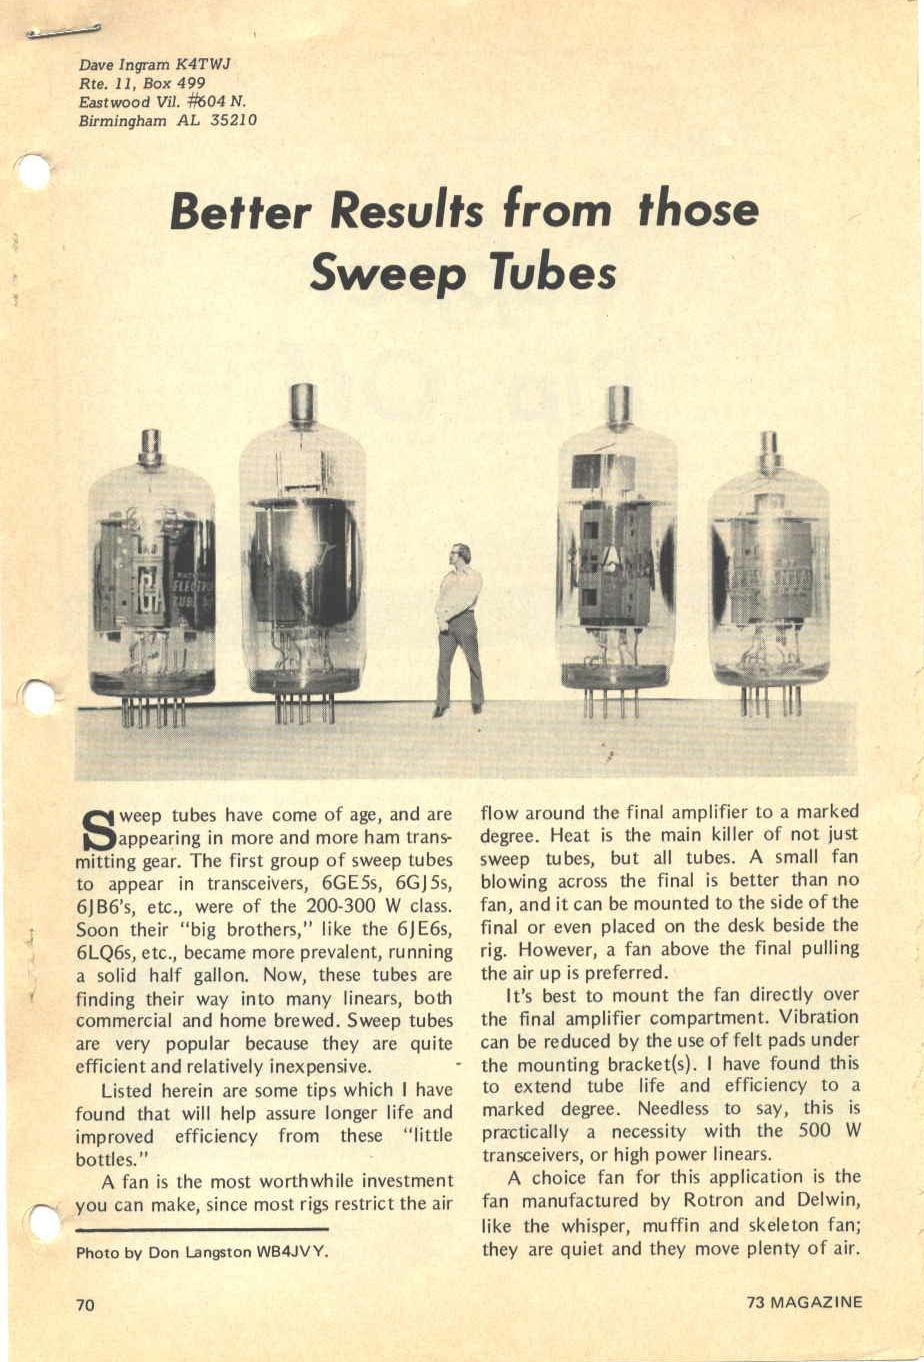 Better results from those sweep tubes, part 1